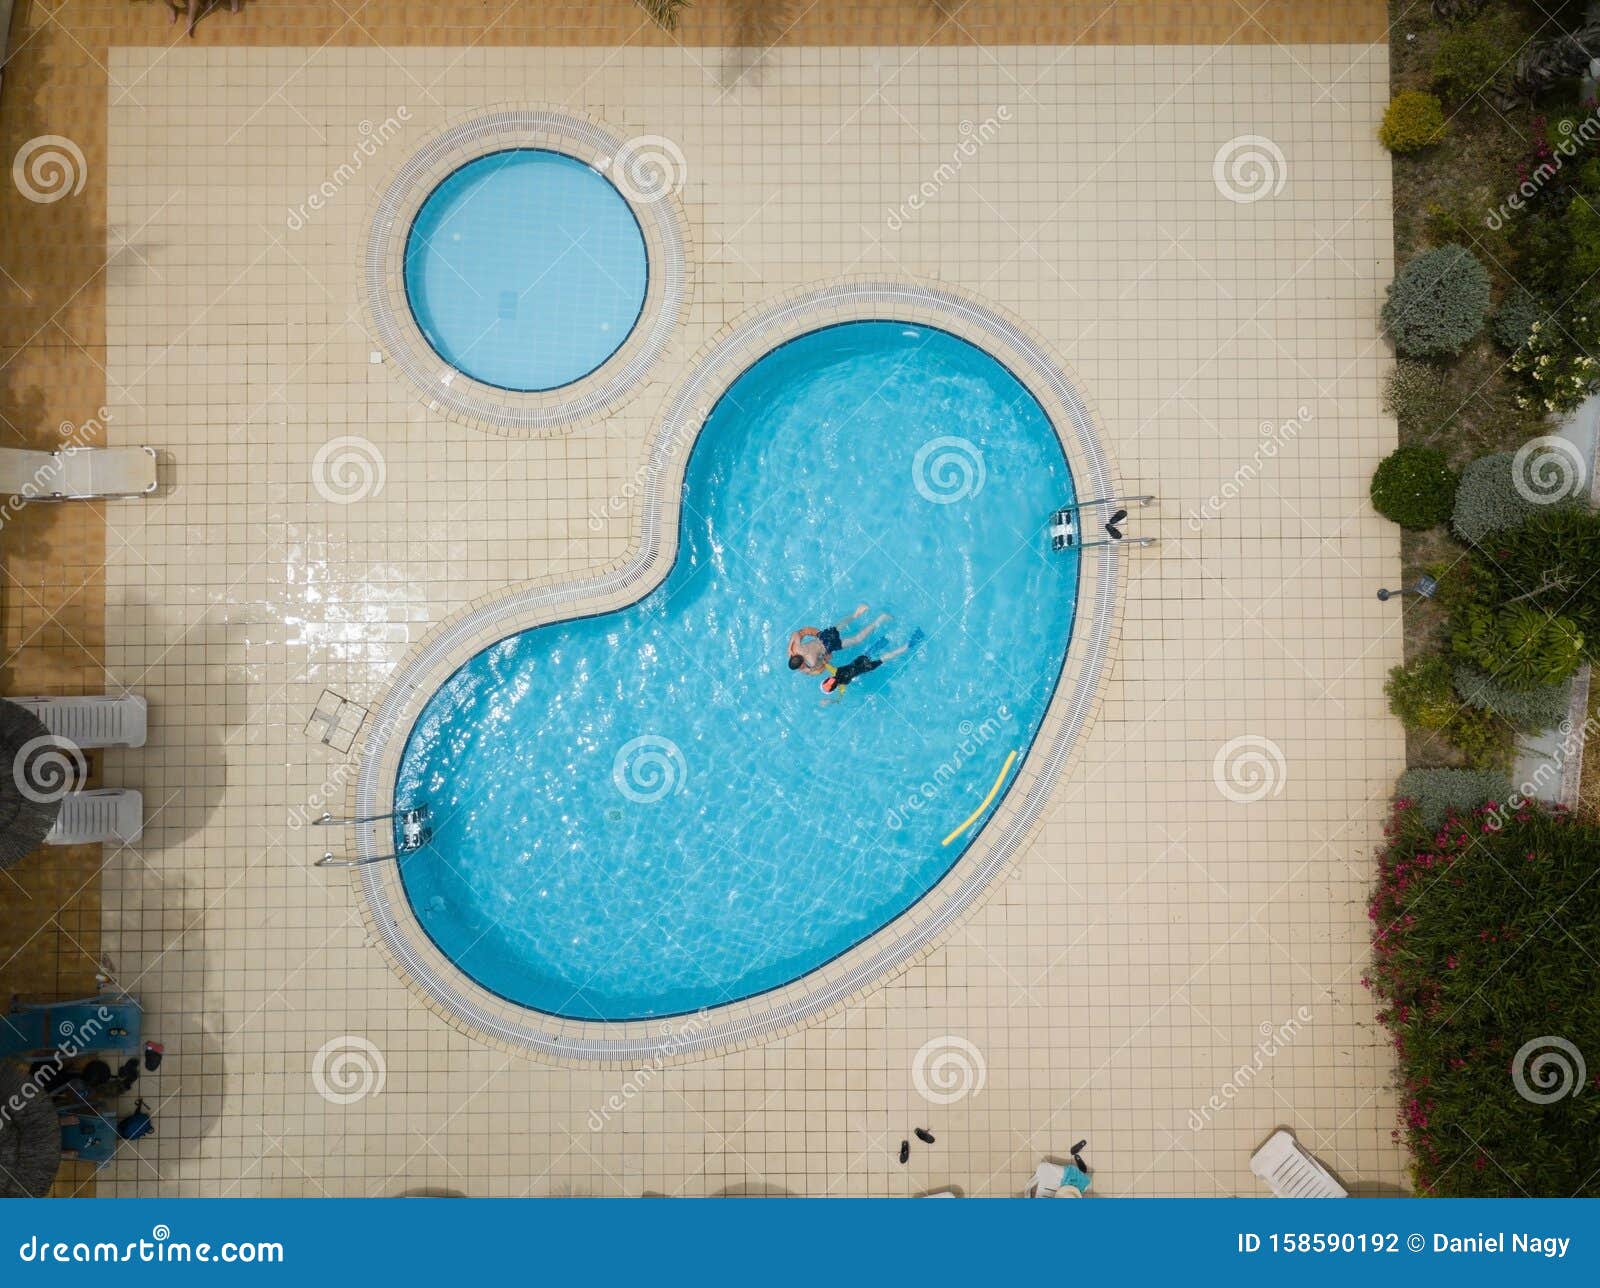 Drone Image Birds Eye View About A Blue Swimming Pool With Playing